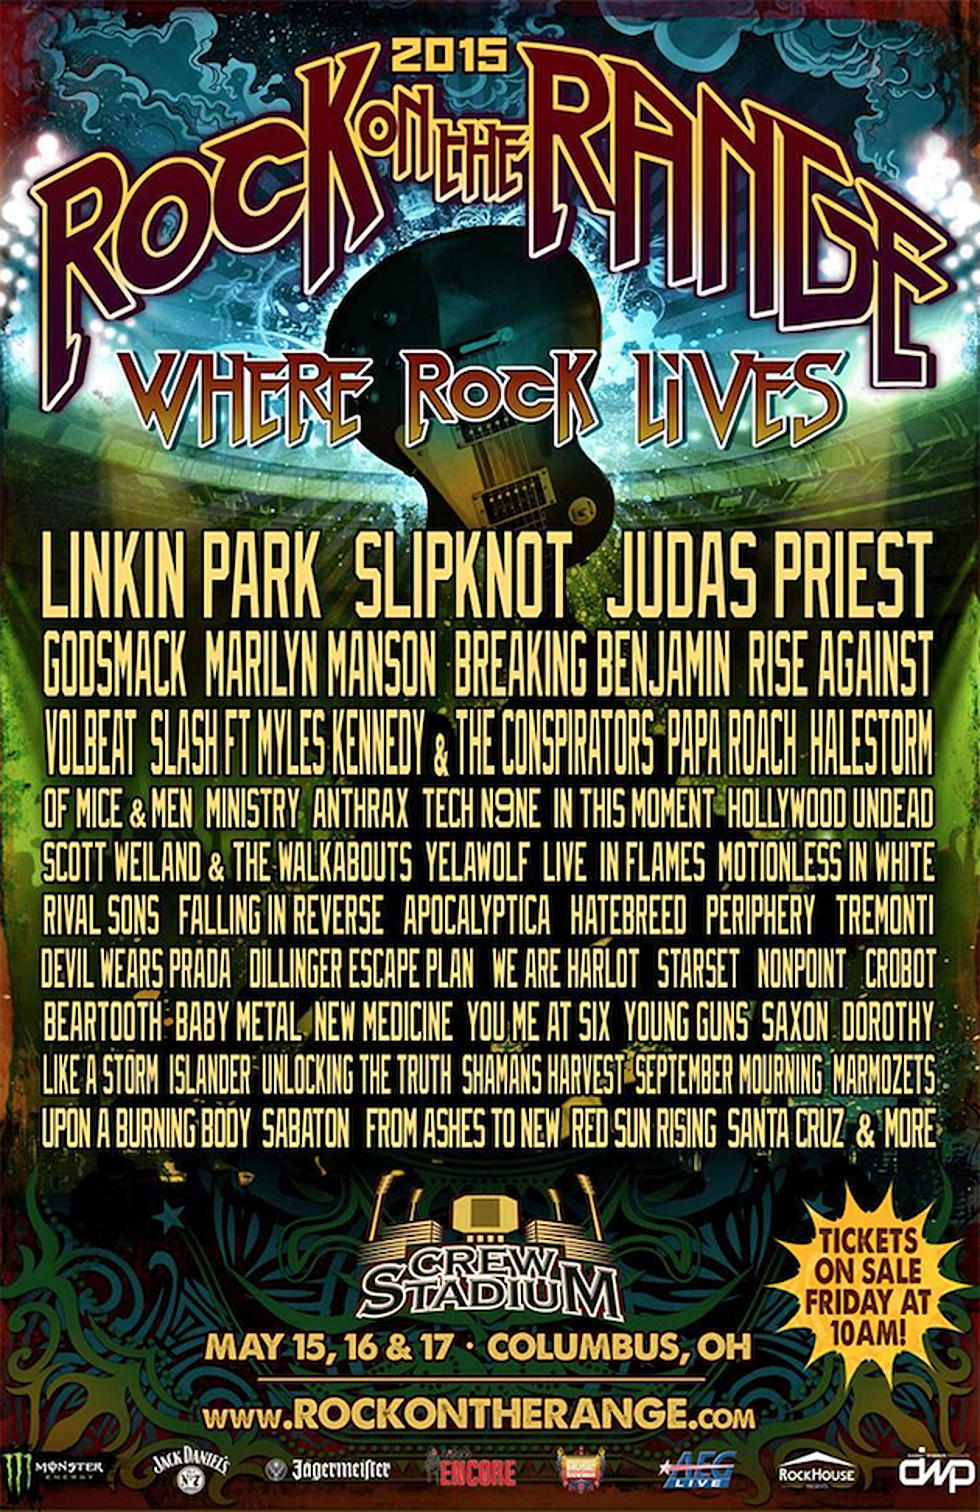 Register to Win Weekend Passes to Rock on the Range 2015!